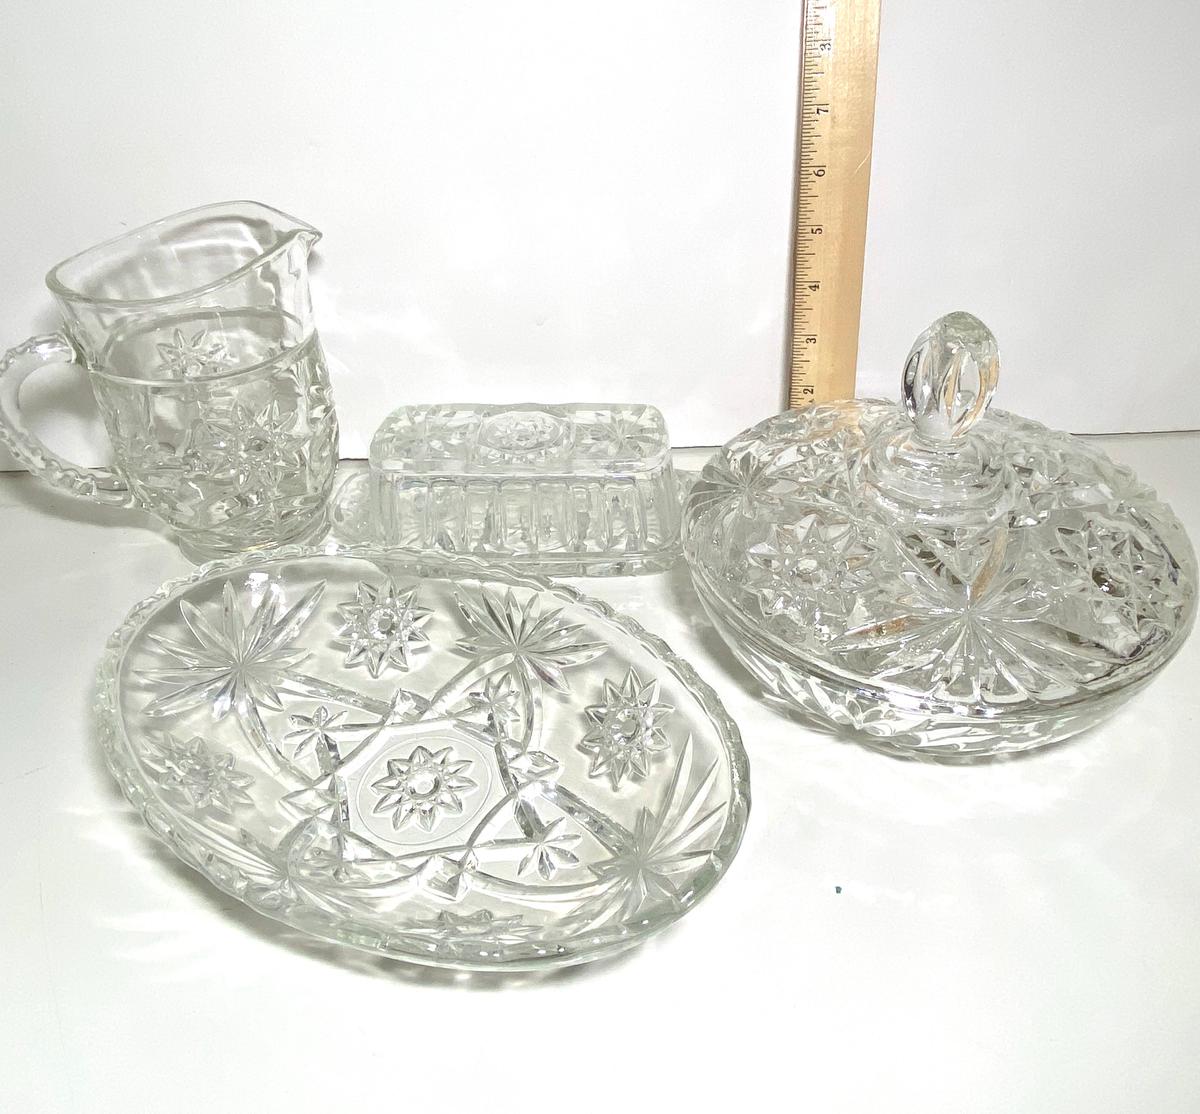 Lot of Vintage Embossed Glass Serving Dishes